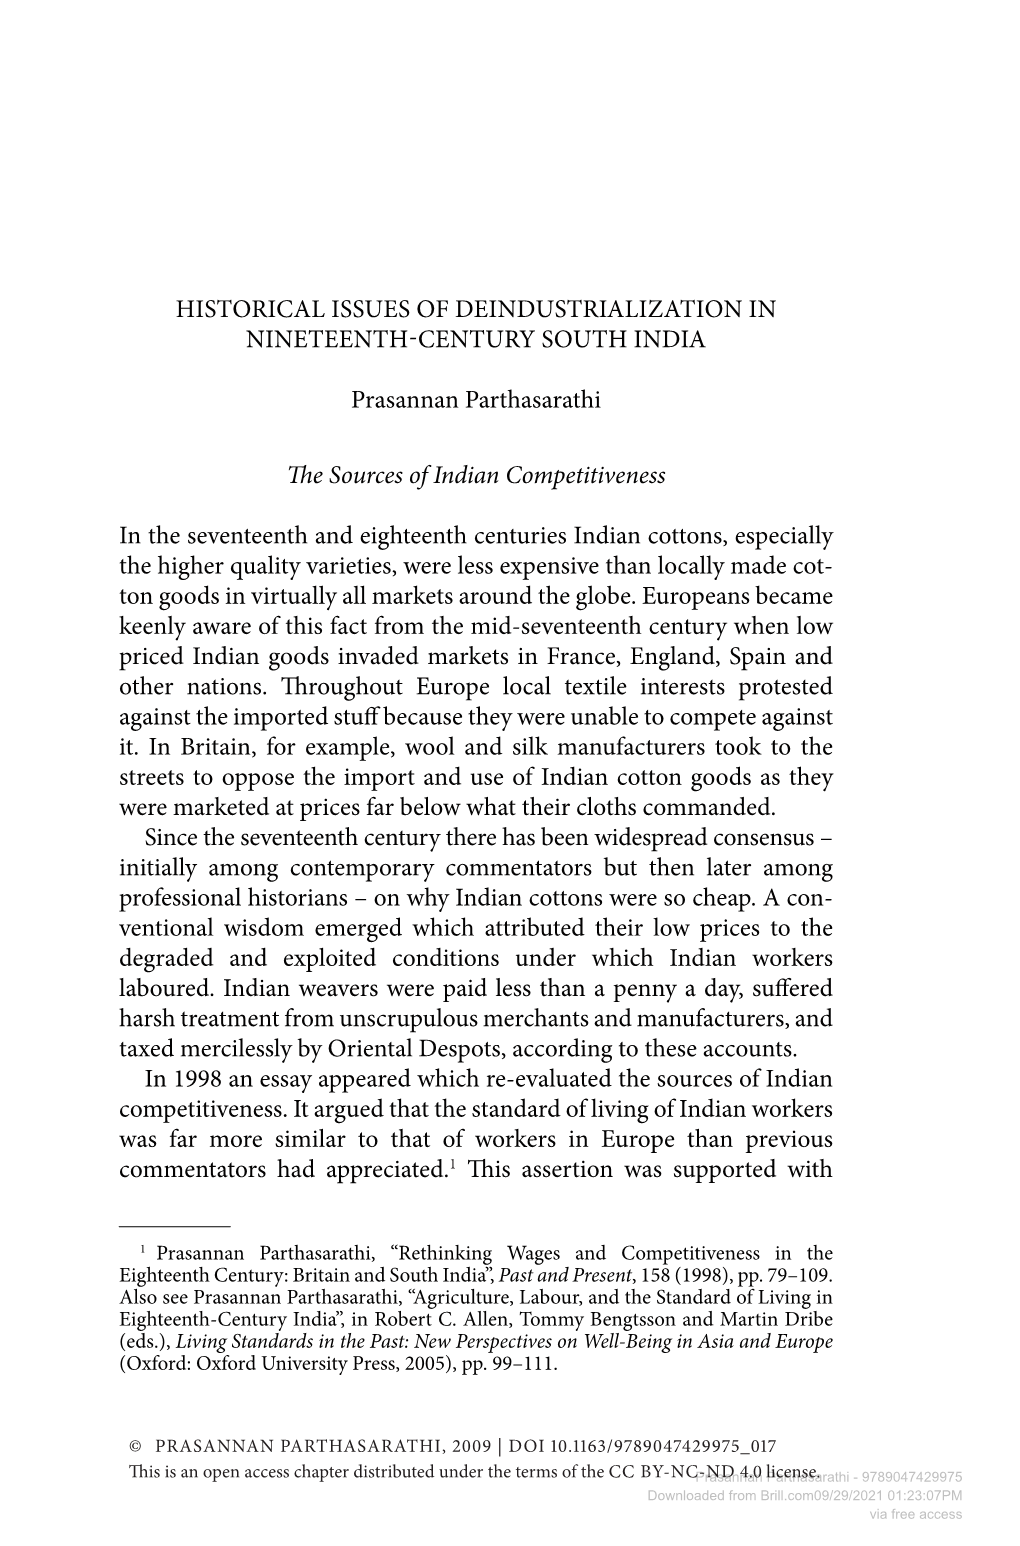 HISTORICAL ISSUES of DEINDUSTRIALIZATION in NINETEENTH-CENTURY SOUTH INDIA Prasannan Parthasarathi the Sources of Indian Competi